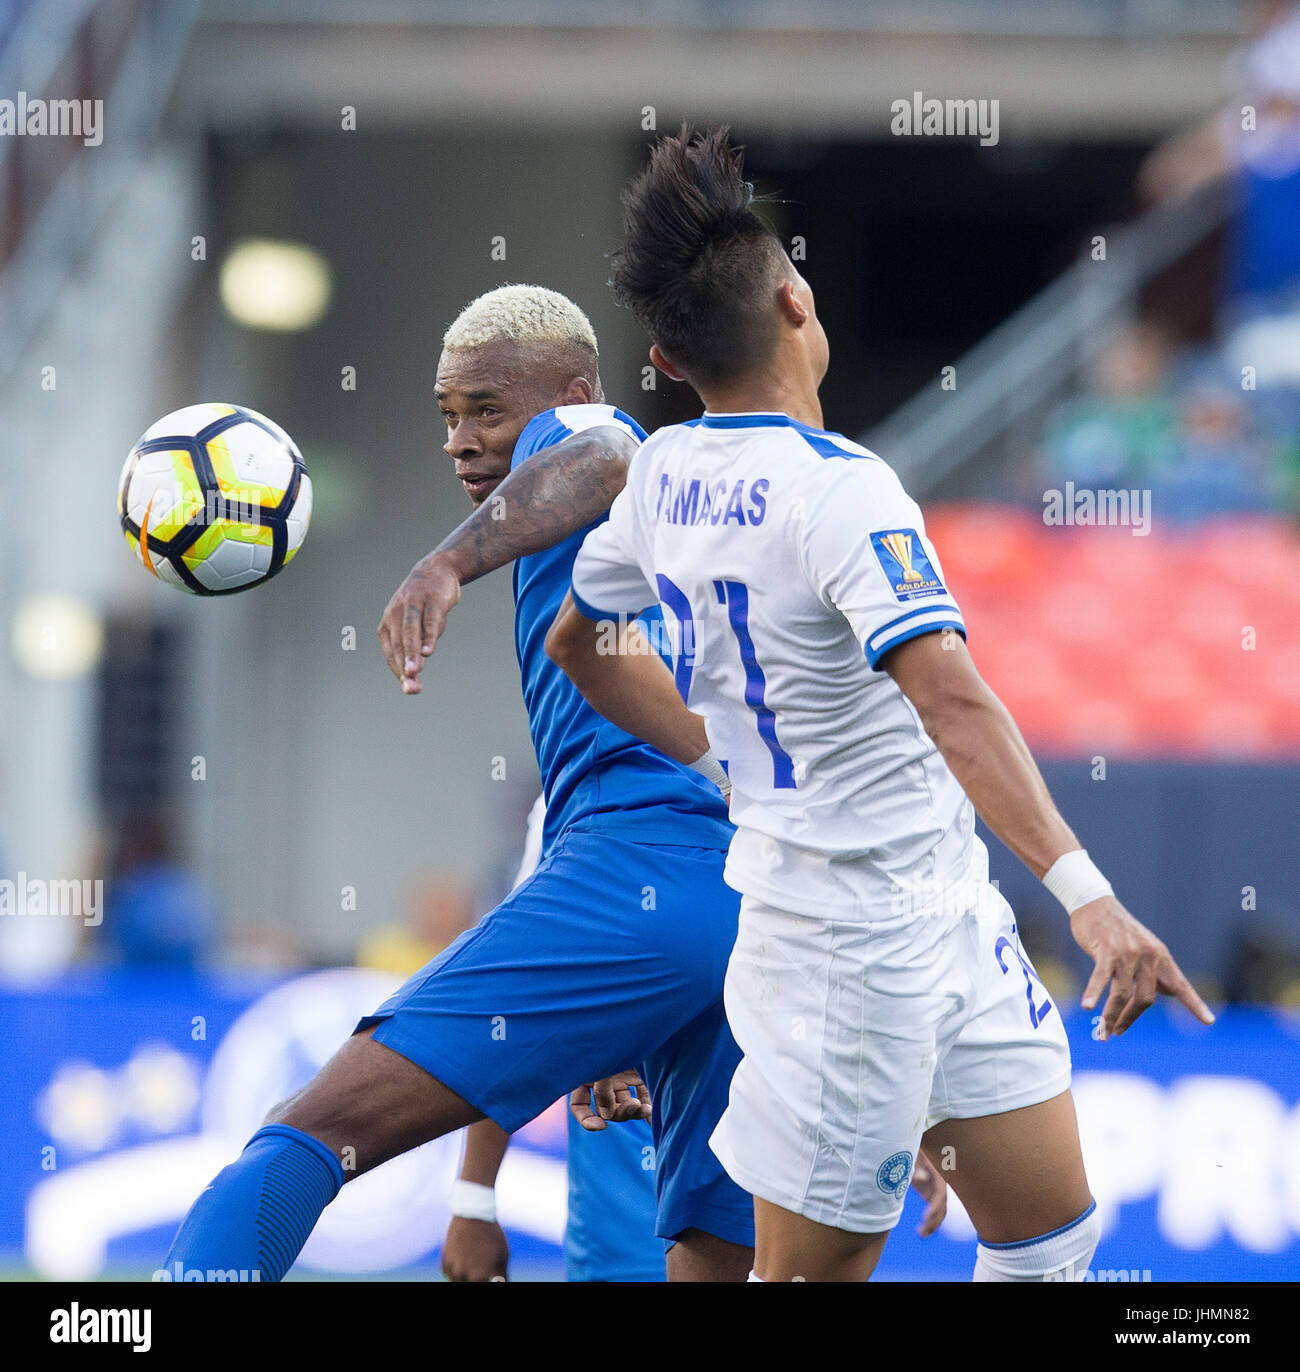 Denver, Colorado, USA. 13th July, 2017. Curacao MF LEANDRO BACUNA, left, battles with El Salvador D BRYAN TAMACAS, right, for control of the ball during the 1st. Half at Sports Authority Field at Mile High during the CONCACAF Gold Cup tournament Thursday night. El Salvador beats Curacao 2-0. Credit: Hector Acevedo/ZUMA Wire/Alamy Live News Stock Photo